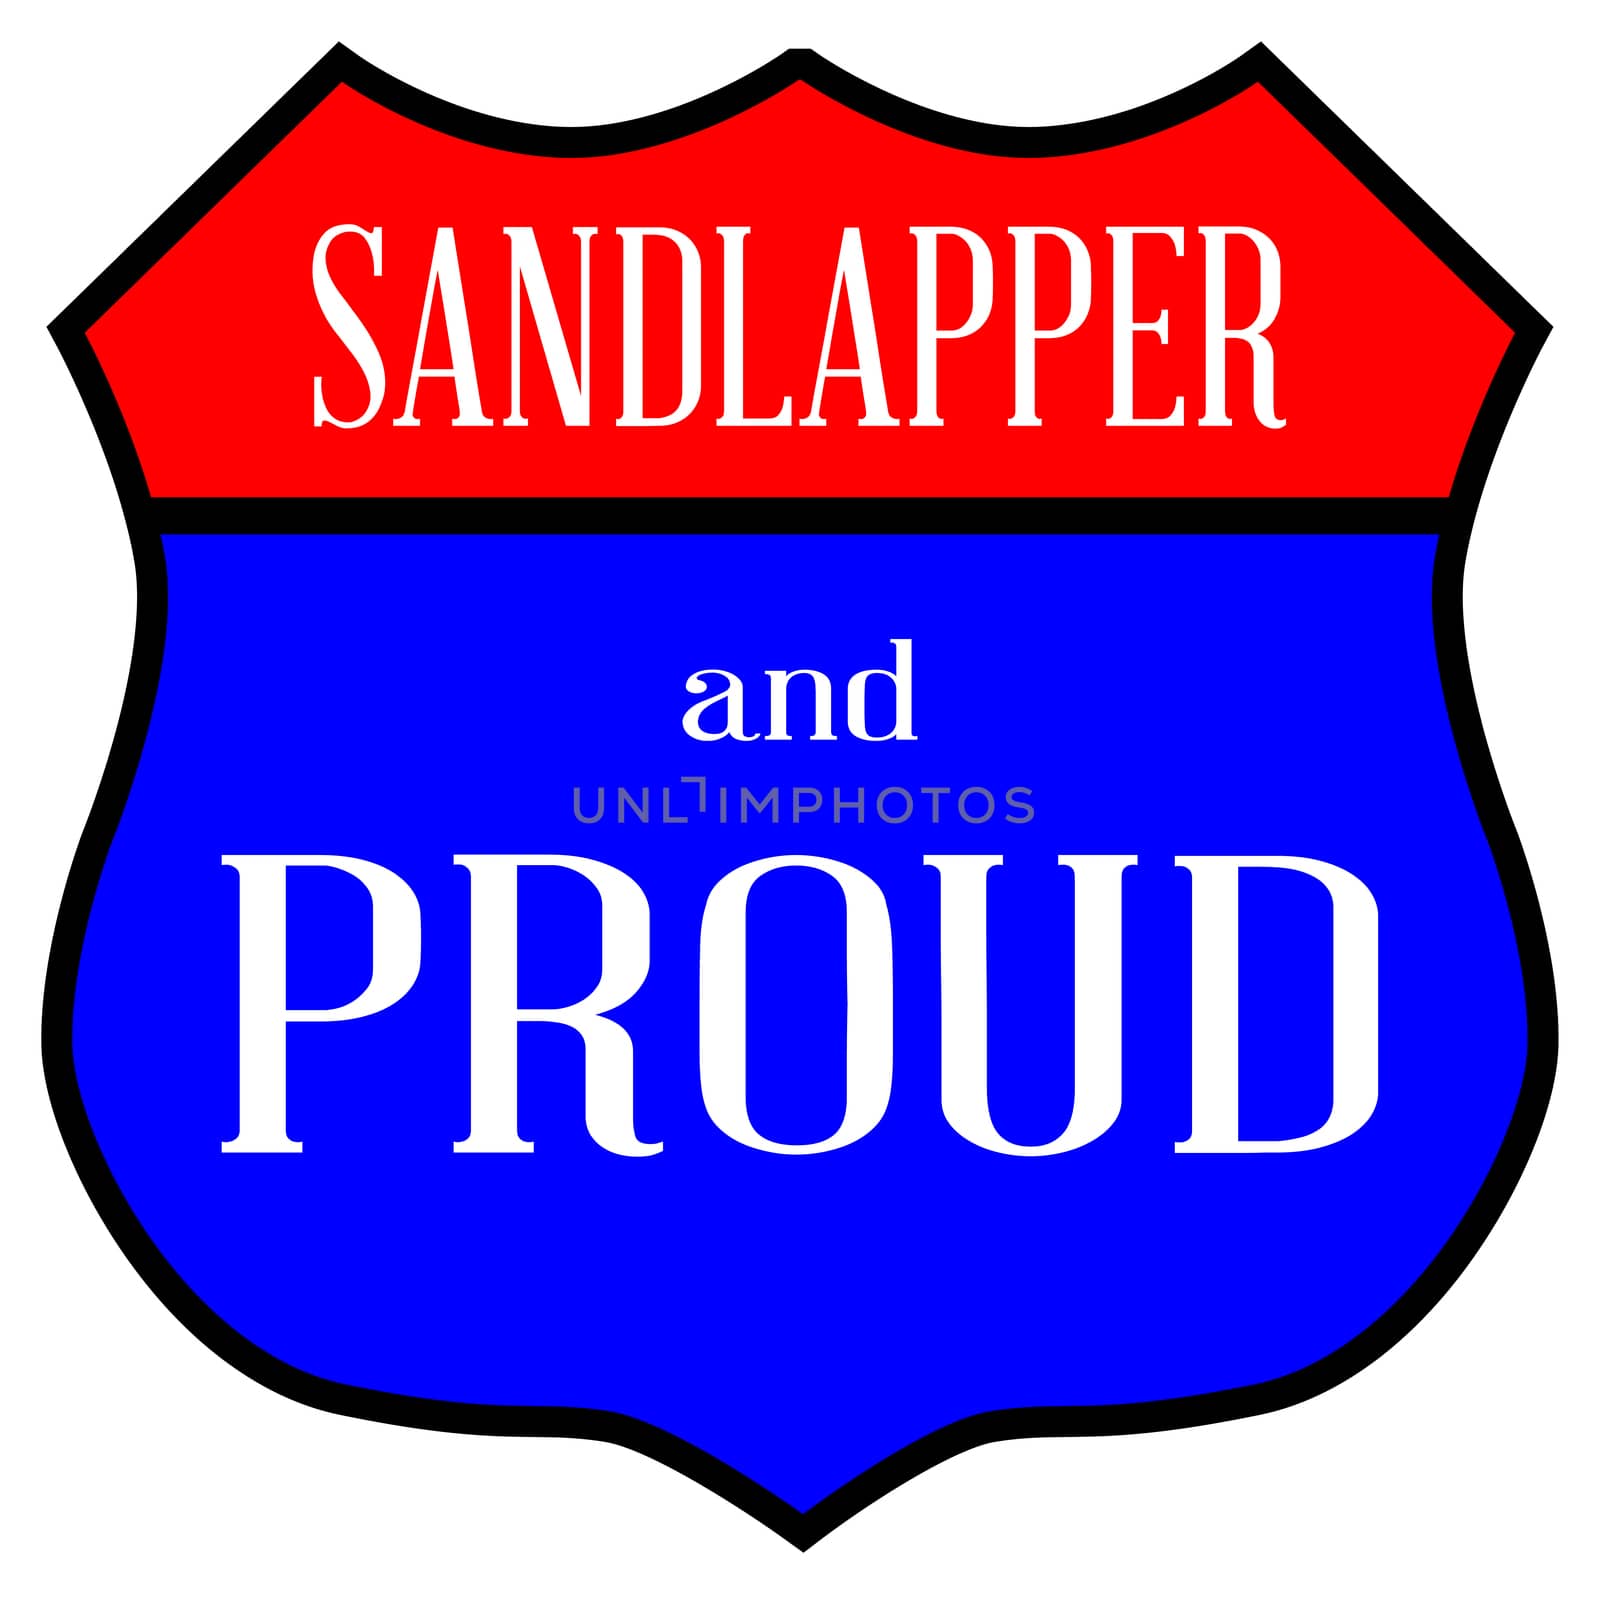 Sandlapper And Proud by Bigalbaloo